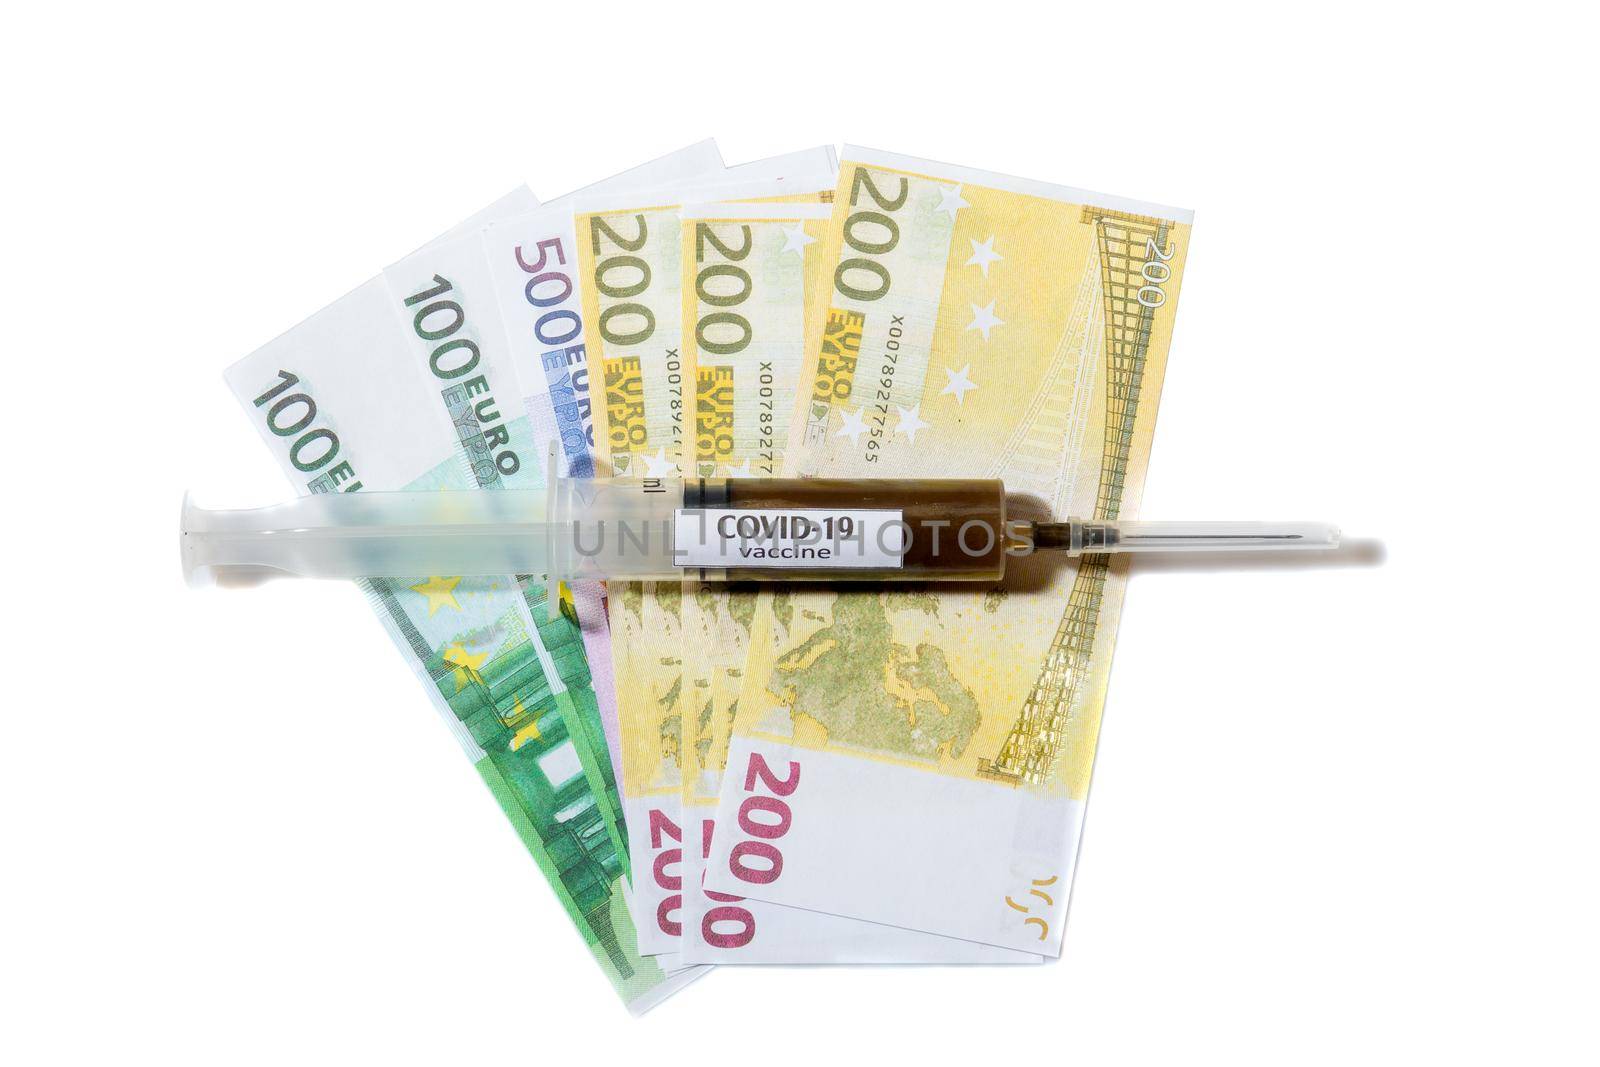 Close up view of needle on a syringe filled with vaccine laying on a euro banknote. Isolated on white background